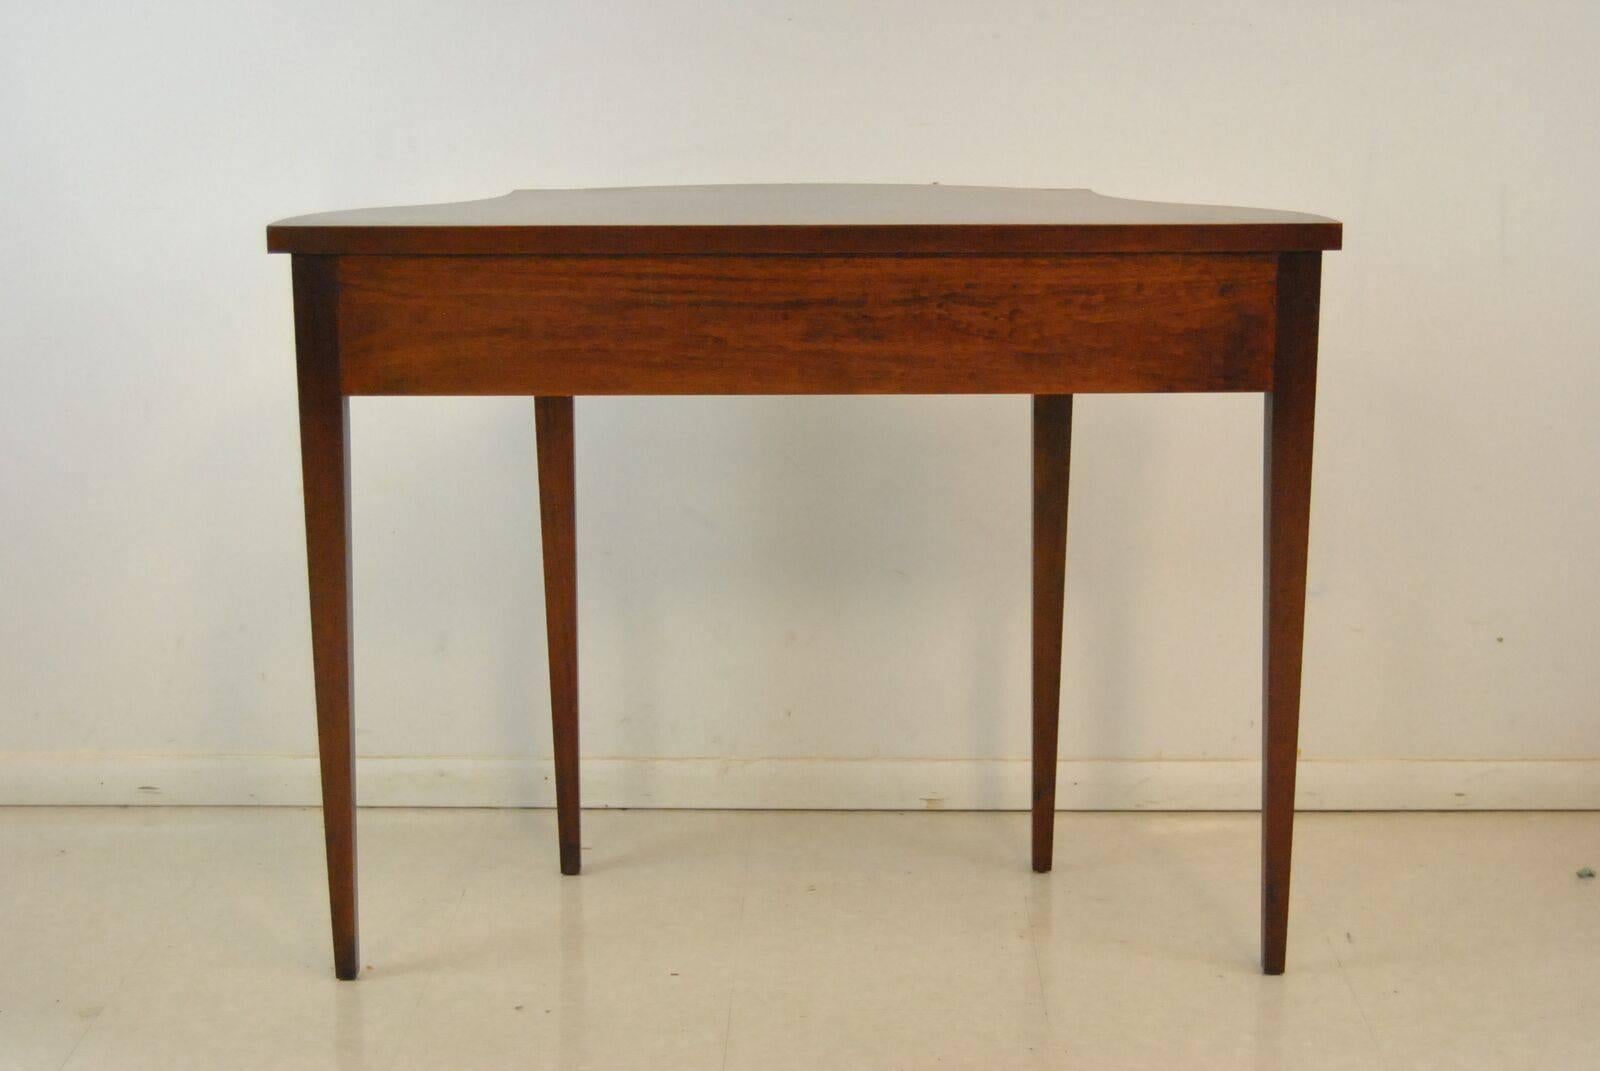 20th Century Inlay Console Table by Baker Furniture from the Historic Charleston Collection